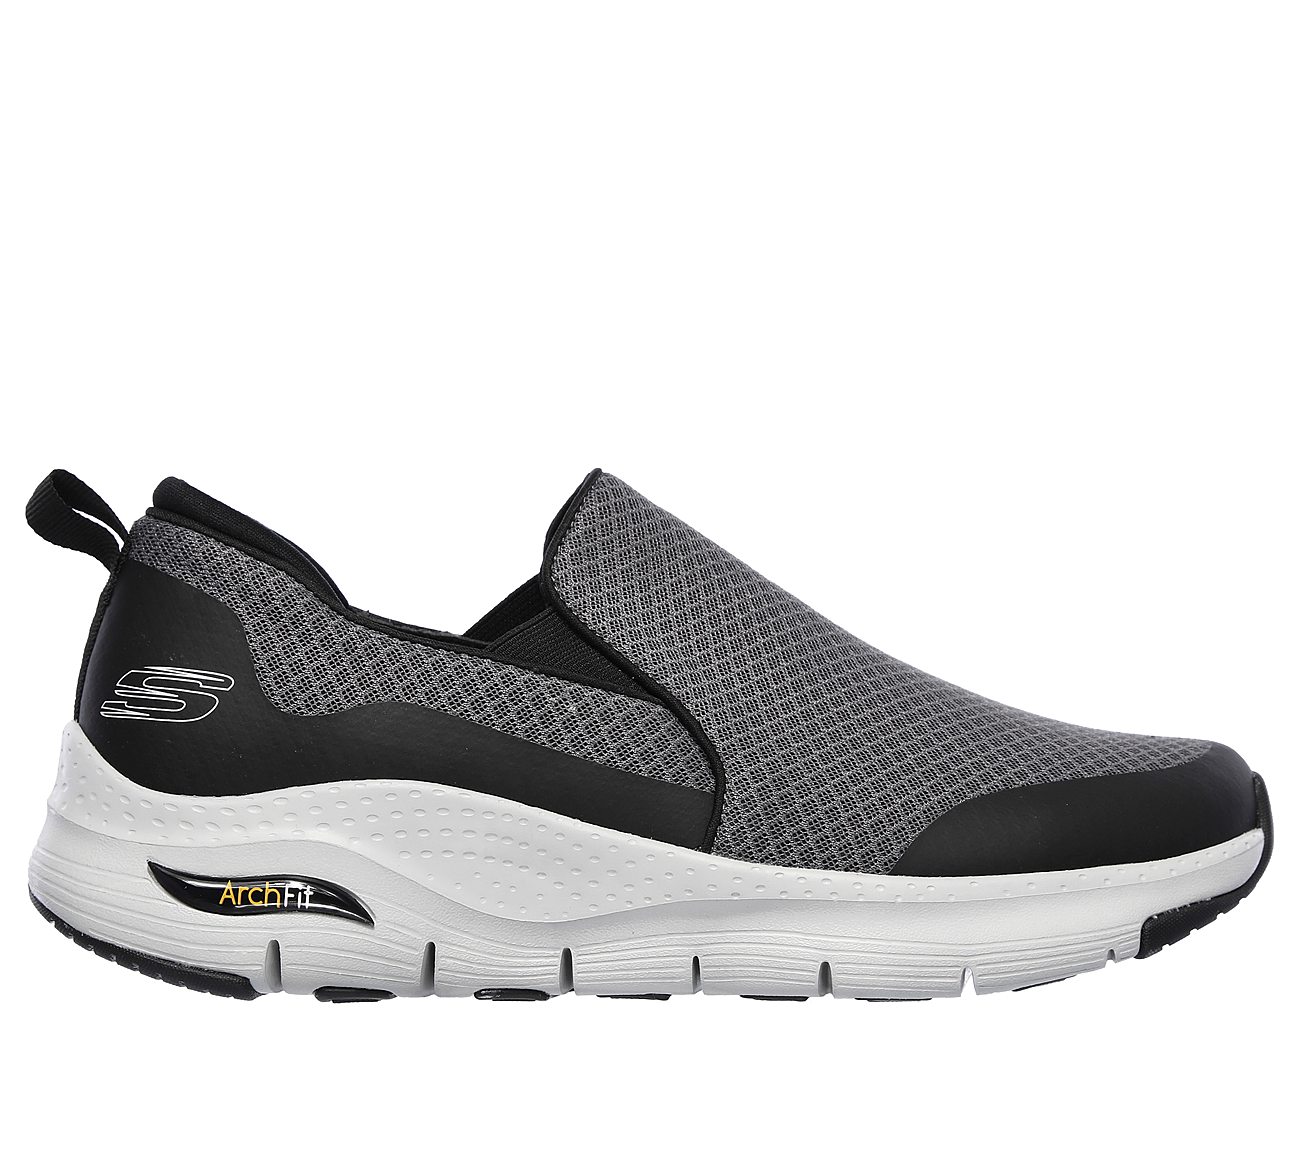 skechers outdoor shoes Online Shopping 